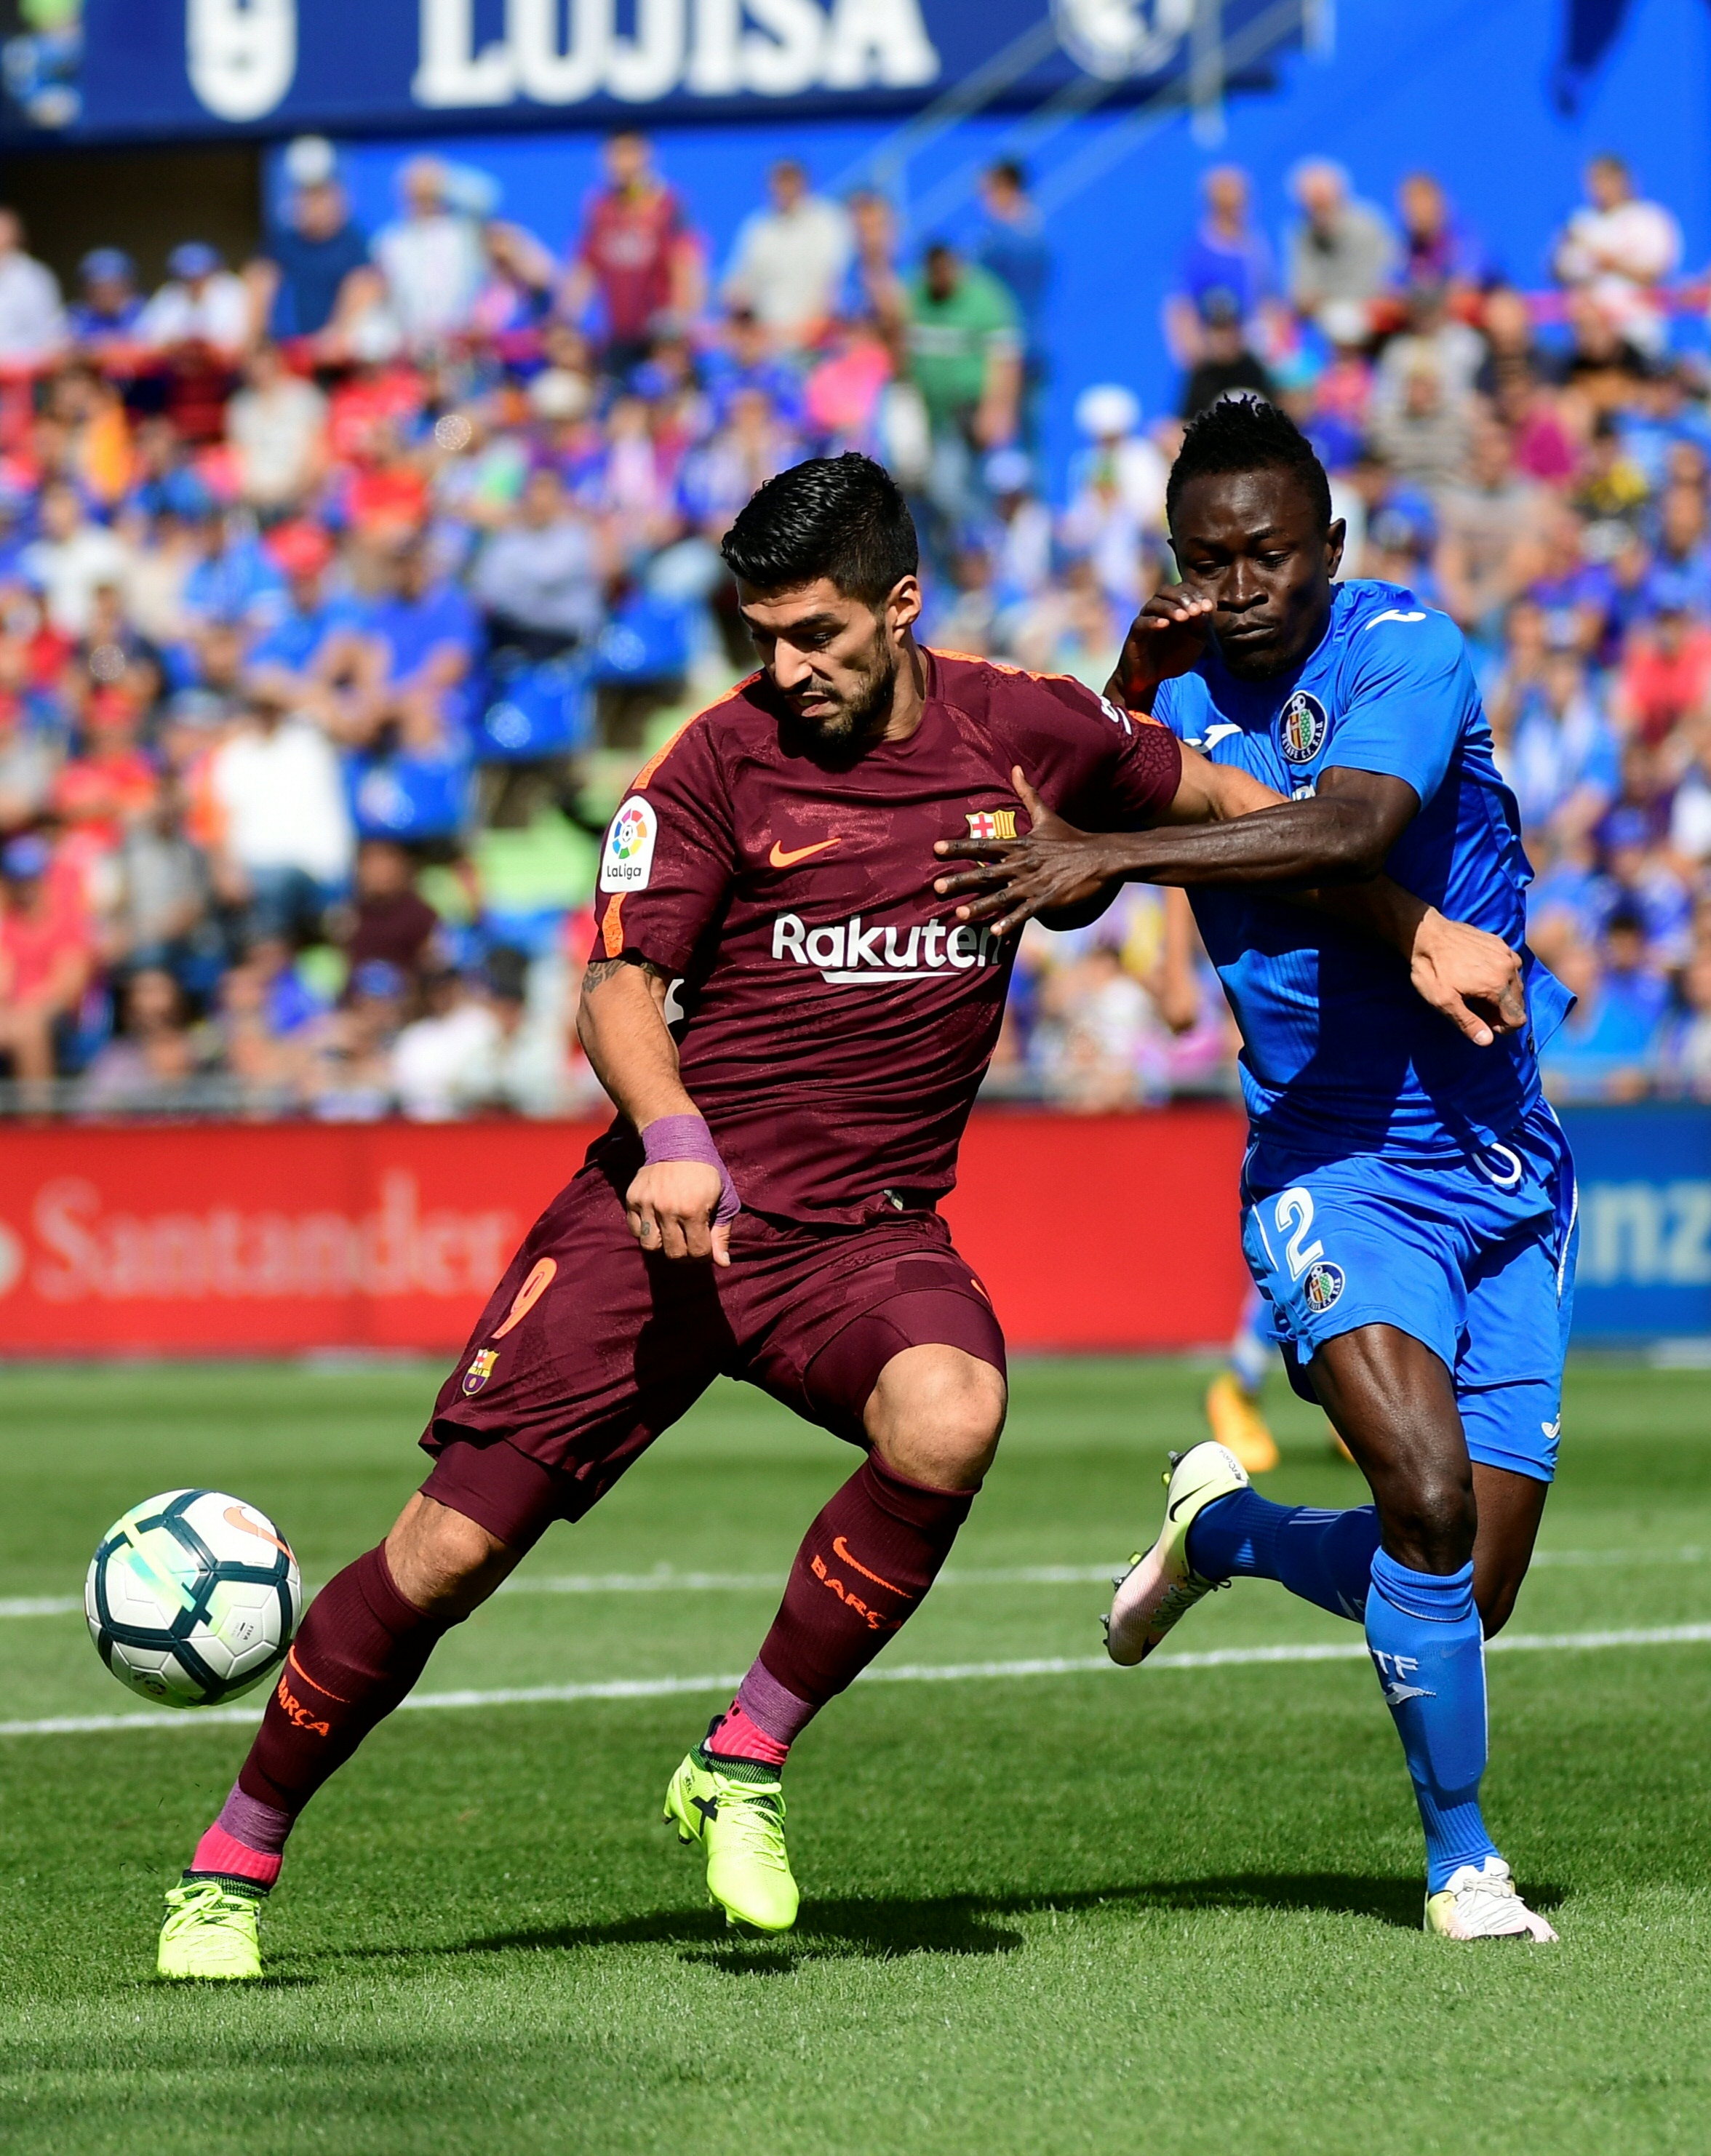 Getafe's defender from Togo Dakonam Djene (R) vies with Barcelona's forward from Uruguay Luis Suarez during the Spanish league football match Getafe CF vs FC Barcelona at the Col. Alfonso Perez stadium in Getafe on September 16, 2017. / AFP PHOTO / PIERRE-PHILIPPE MARCOU (Photo credit should read PIERRE-PHILIPPE MARCOU/AFP/Getty Images)